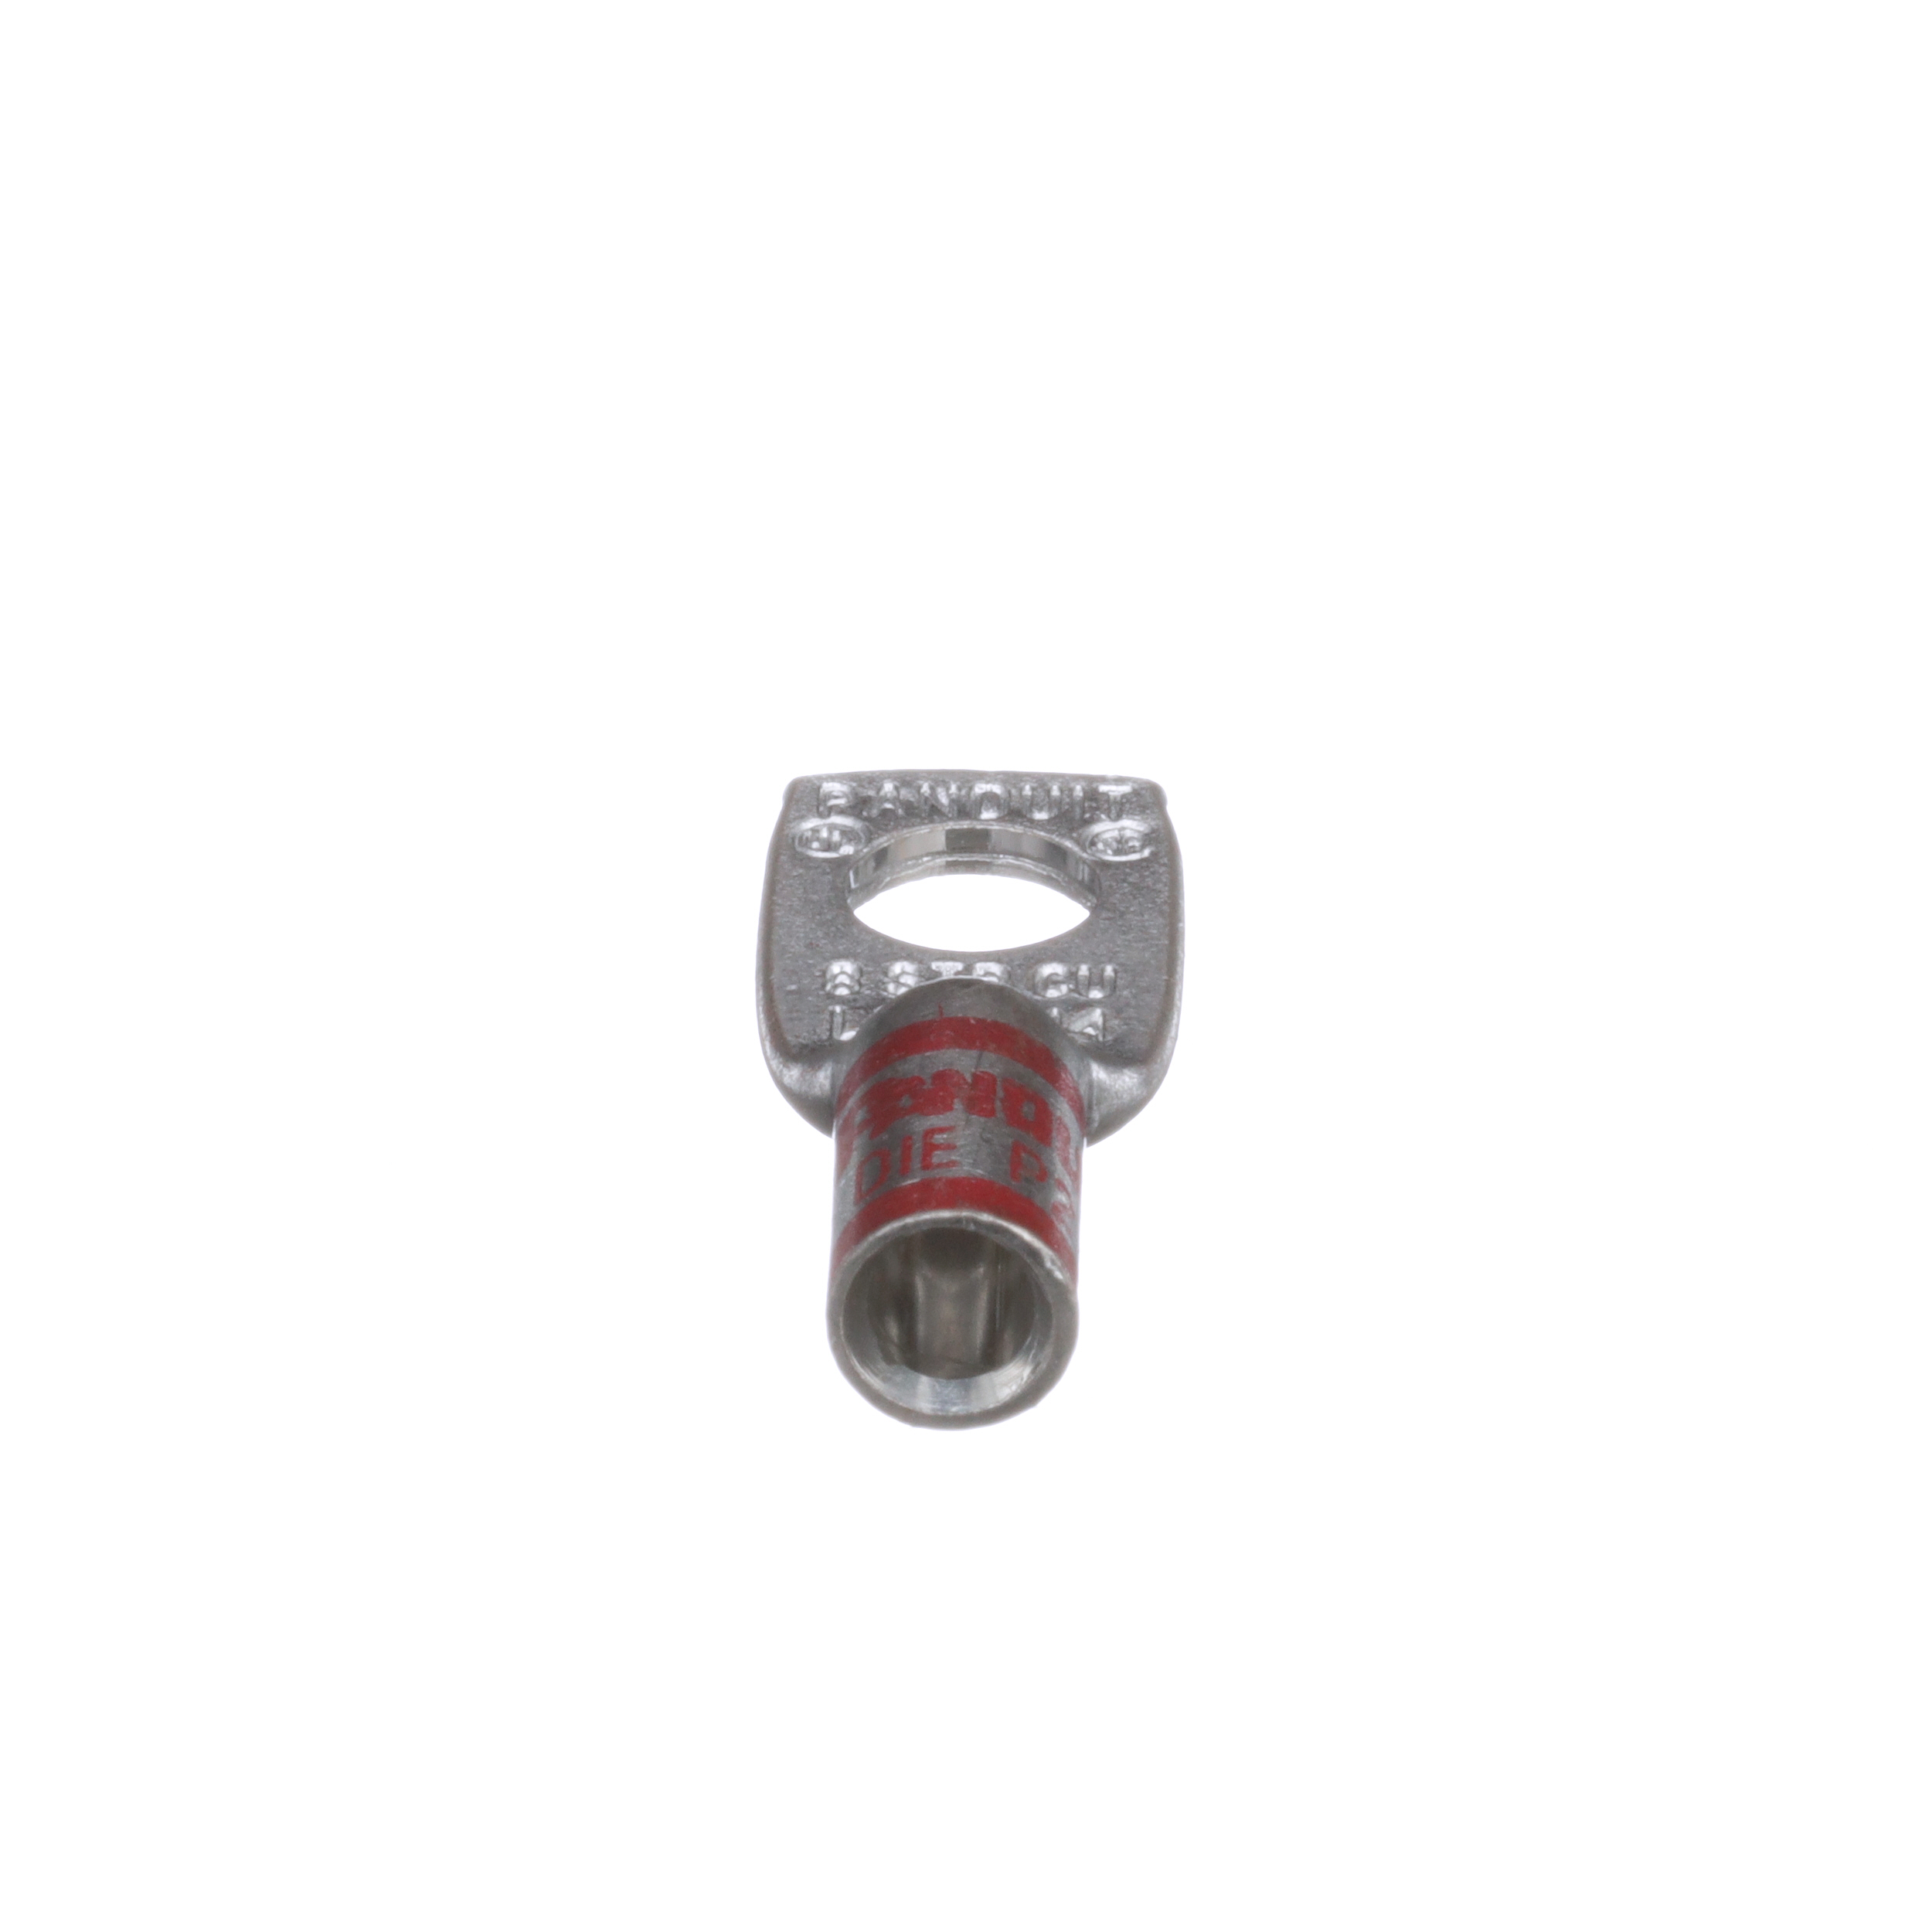 Standard Barrel with Window Panduit LCA3/0-14-X Copper Compression Lug 1/4 Stud Hole 3/0 AWG Wire Pack of 10 One-Hole 